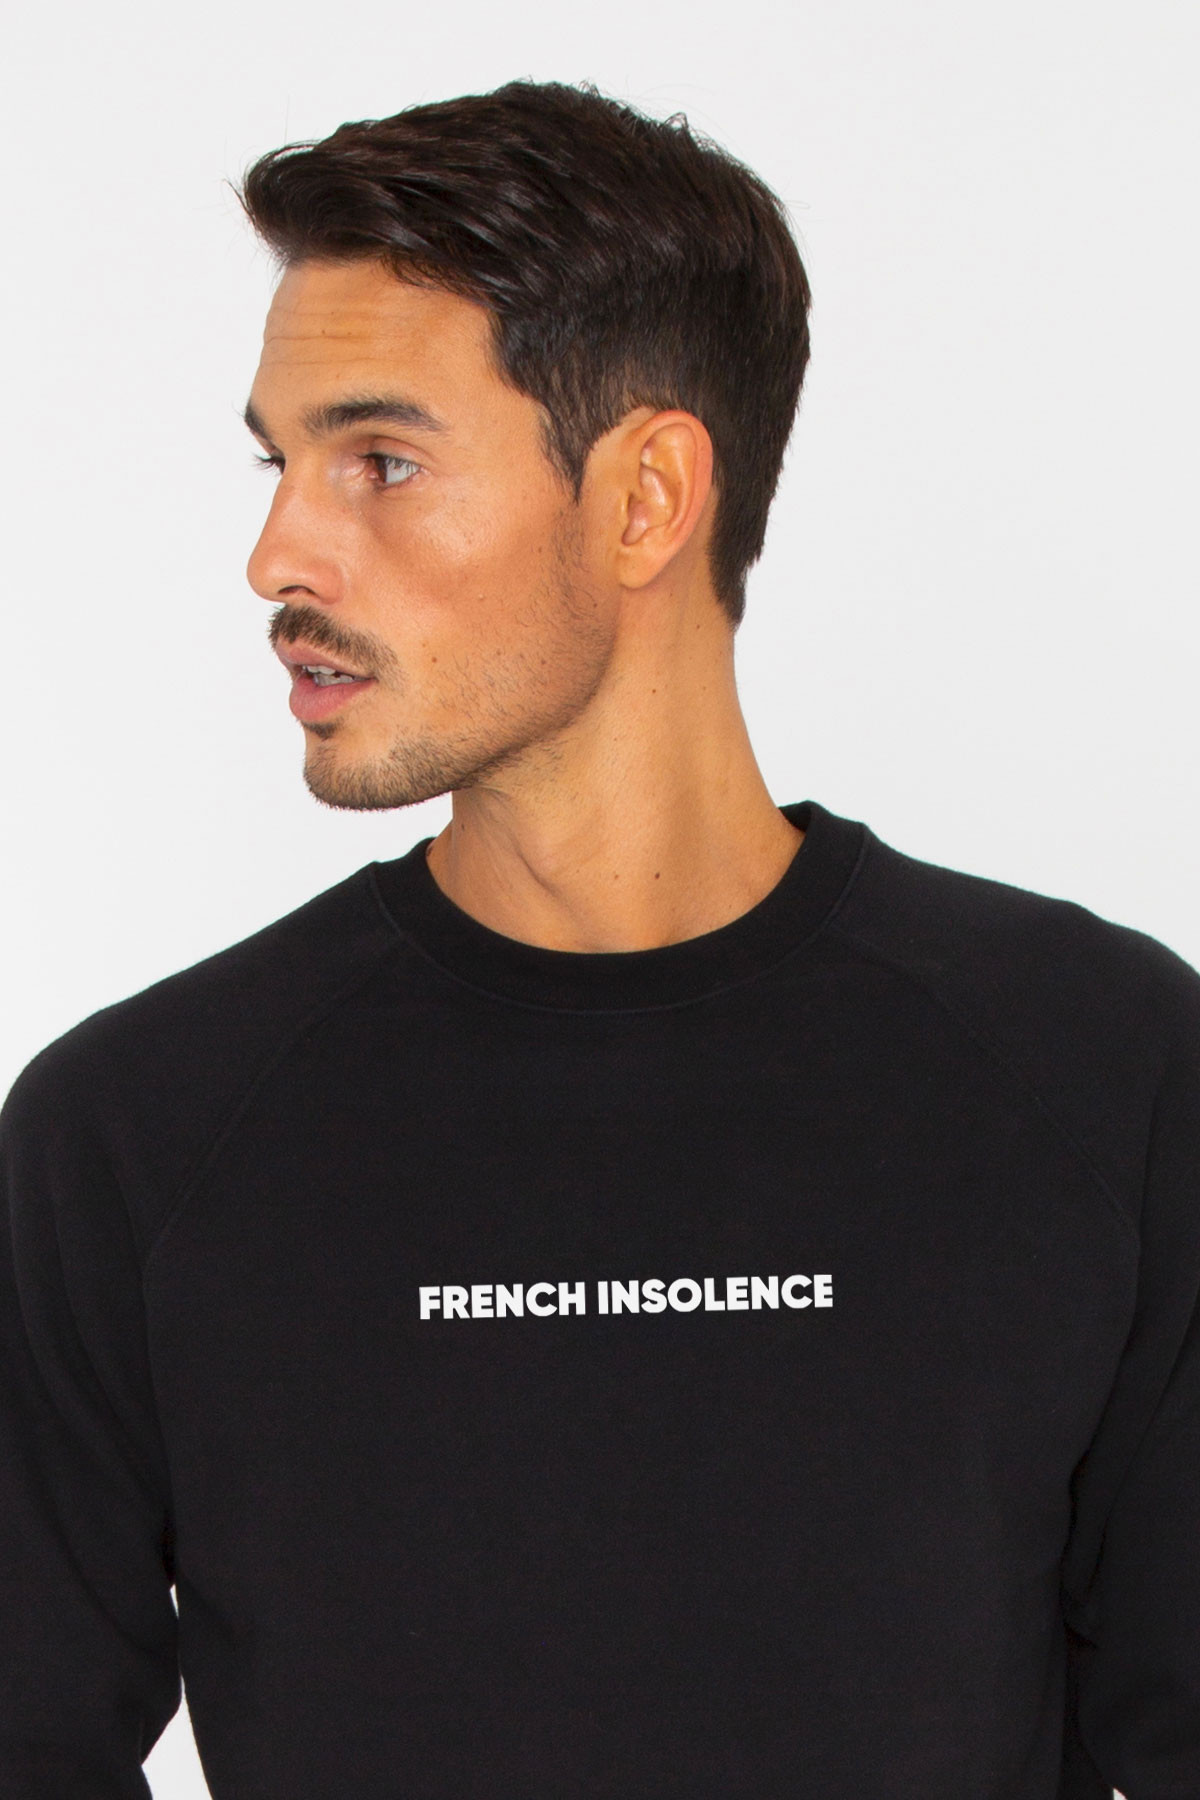 SweatFRENCH INSOLENCE